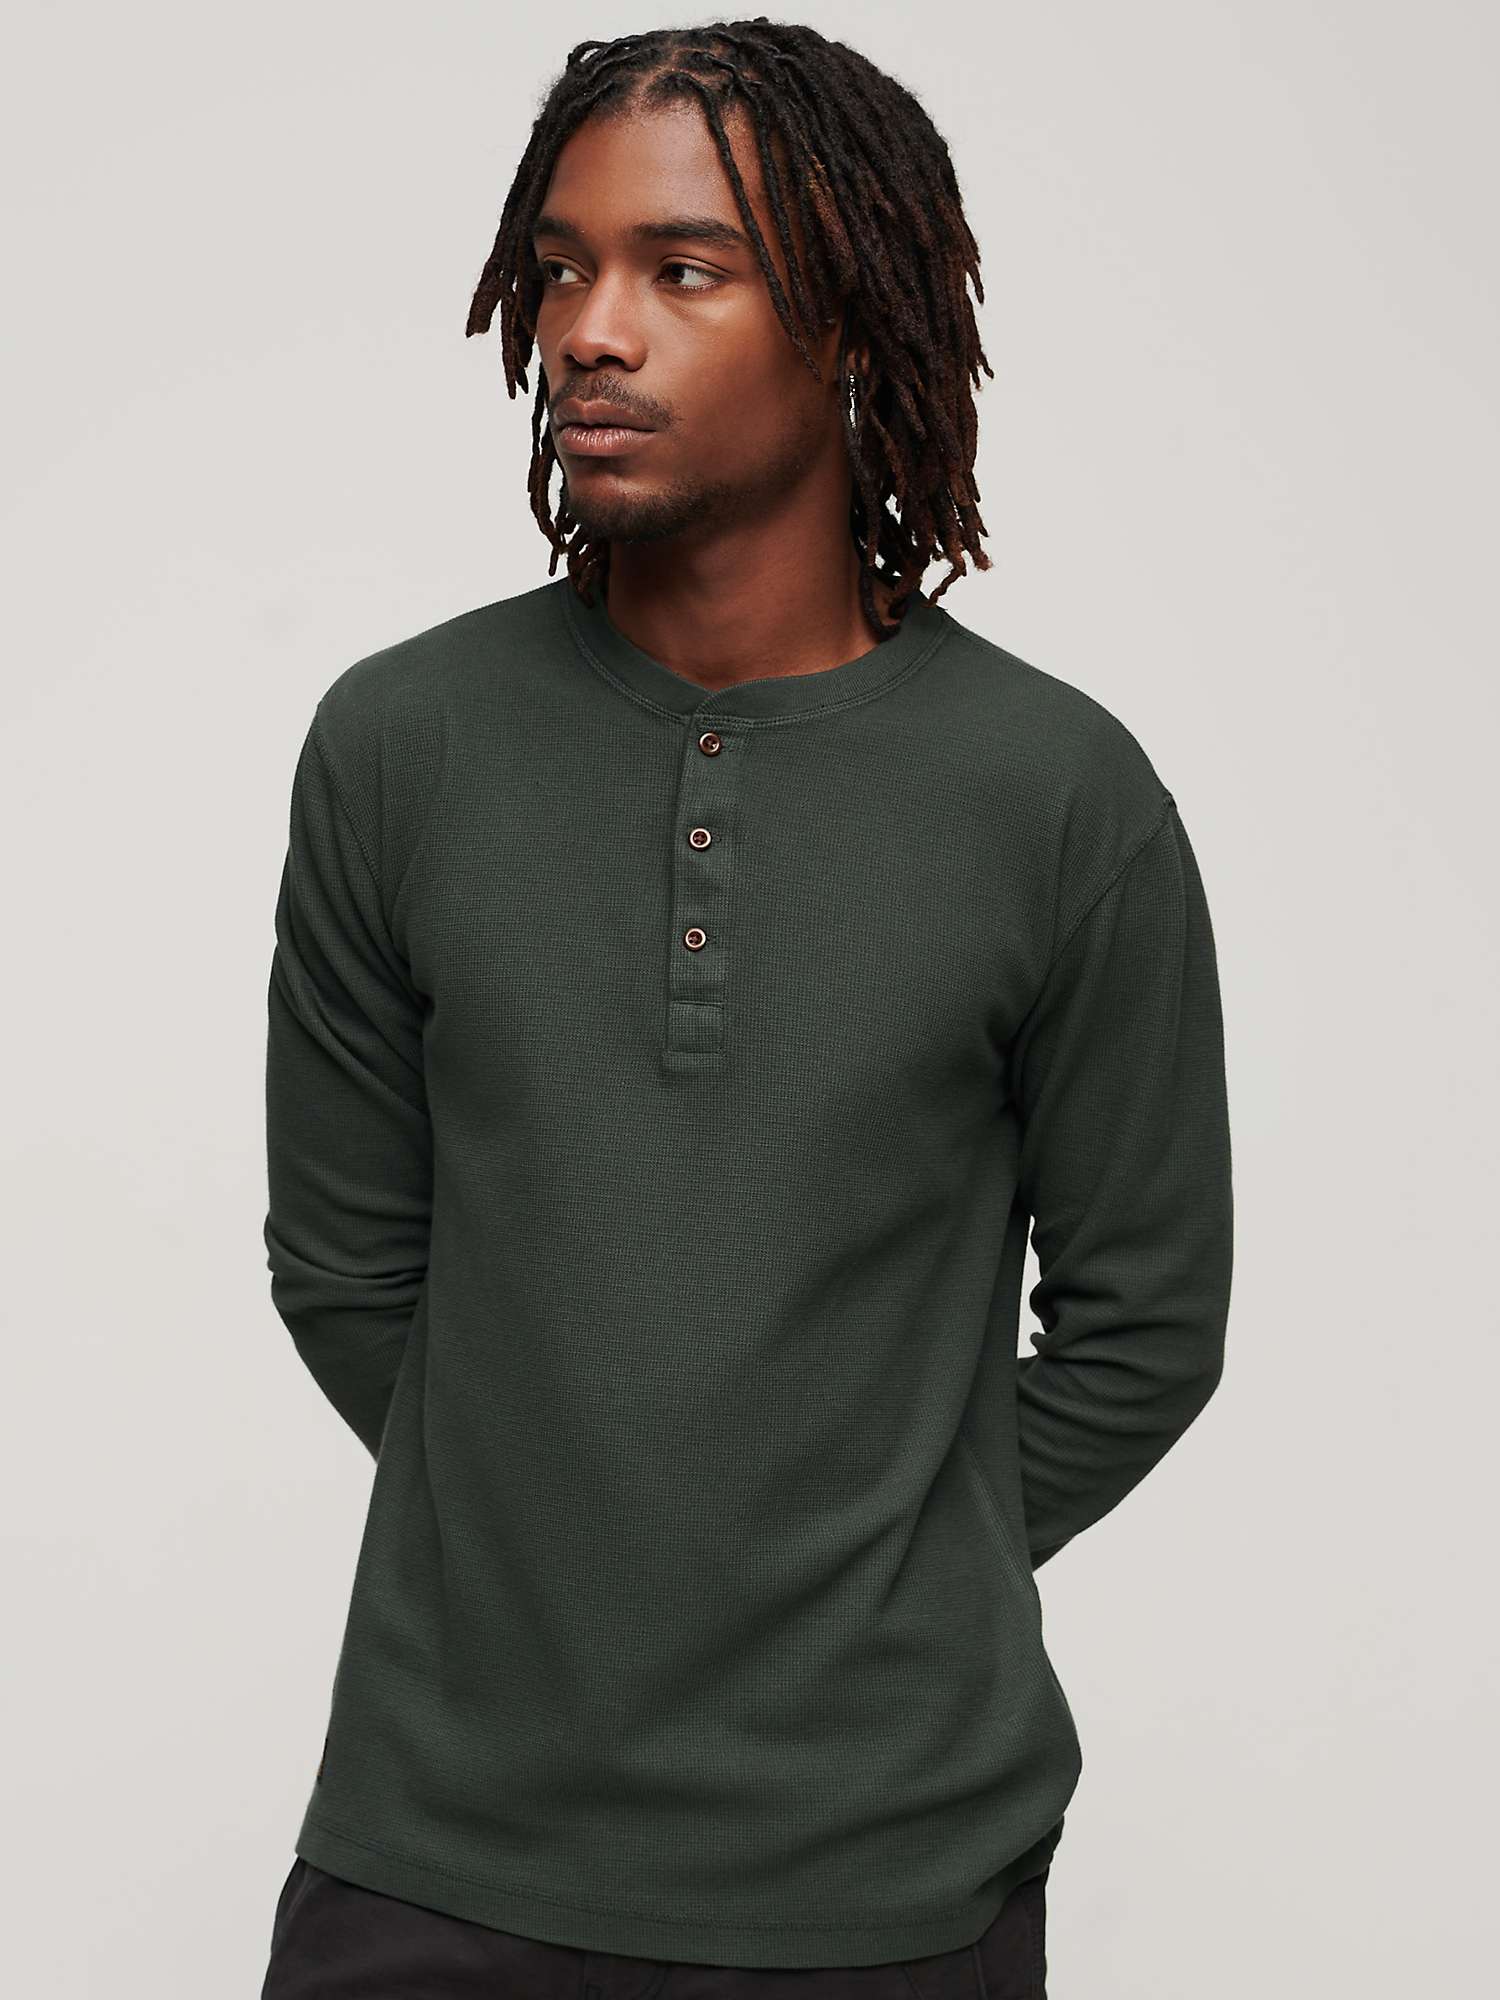 Buy Superdry Organic Cotton Long Sleeve Waffle Henley Top Online at johnlewis.com